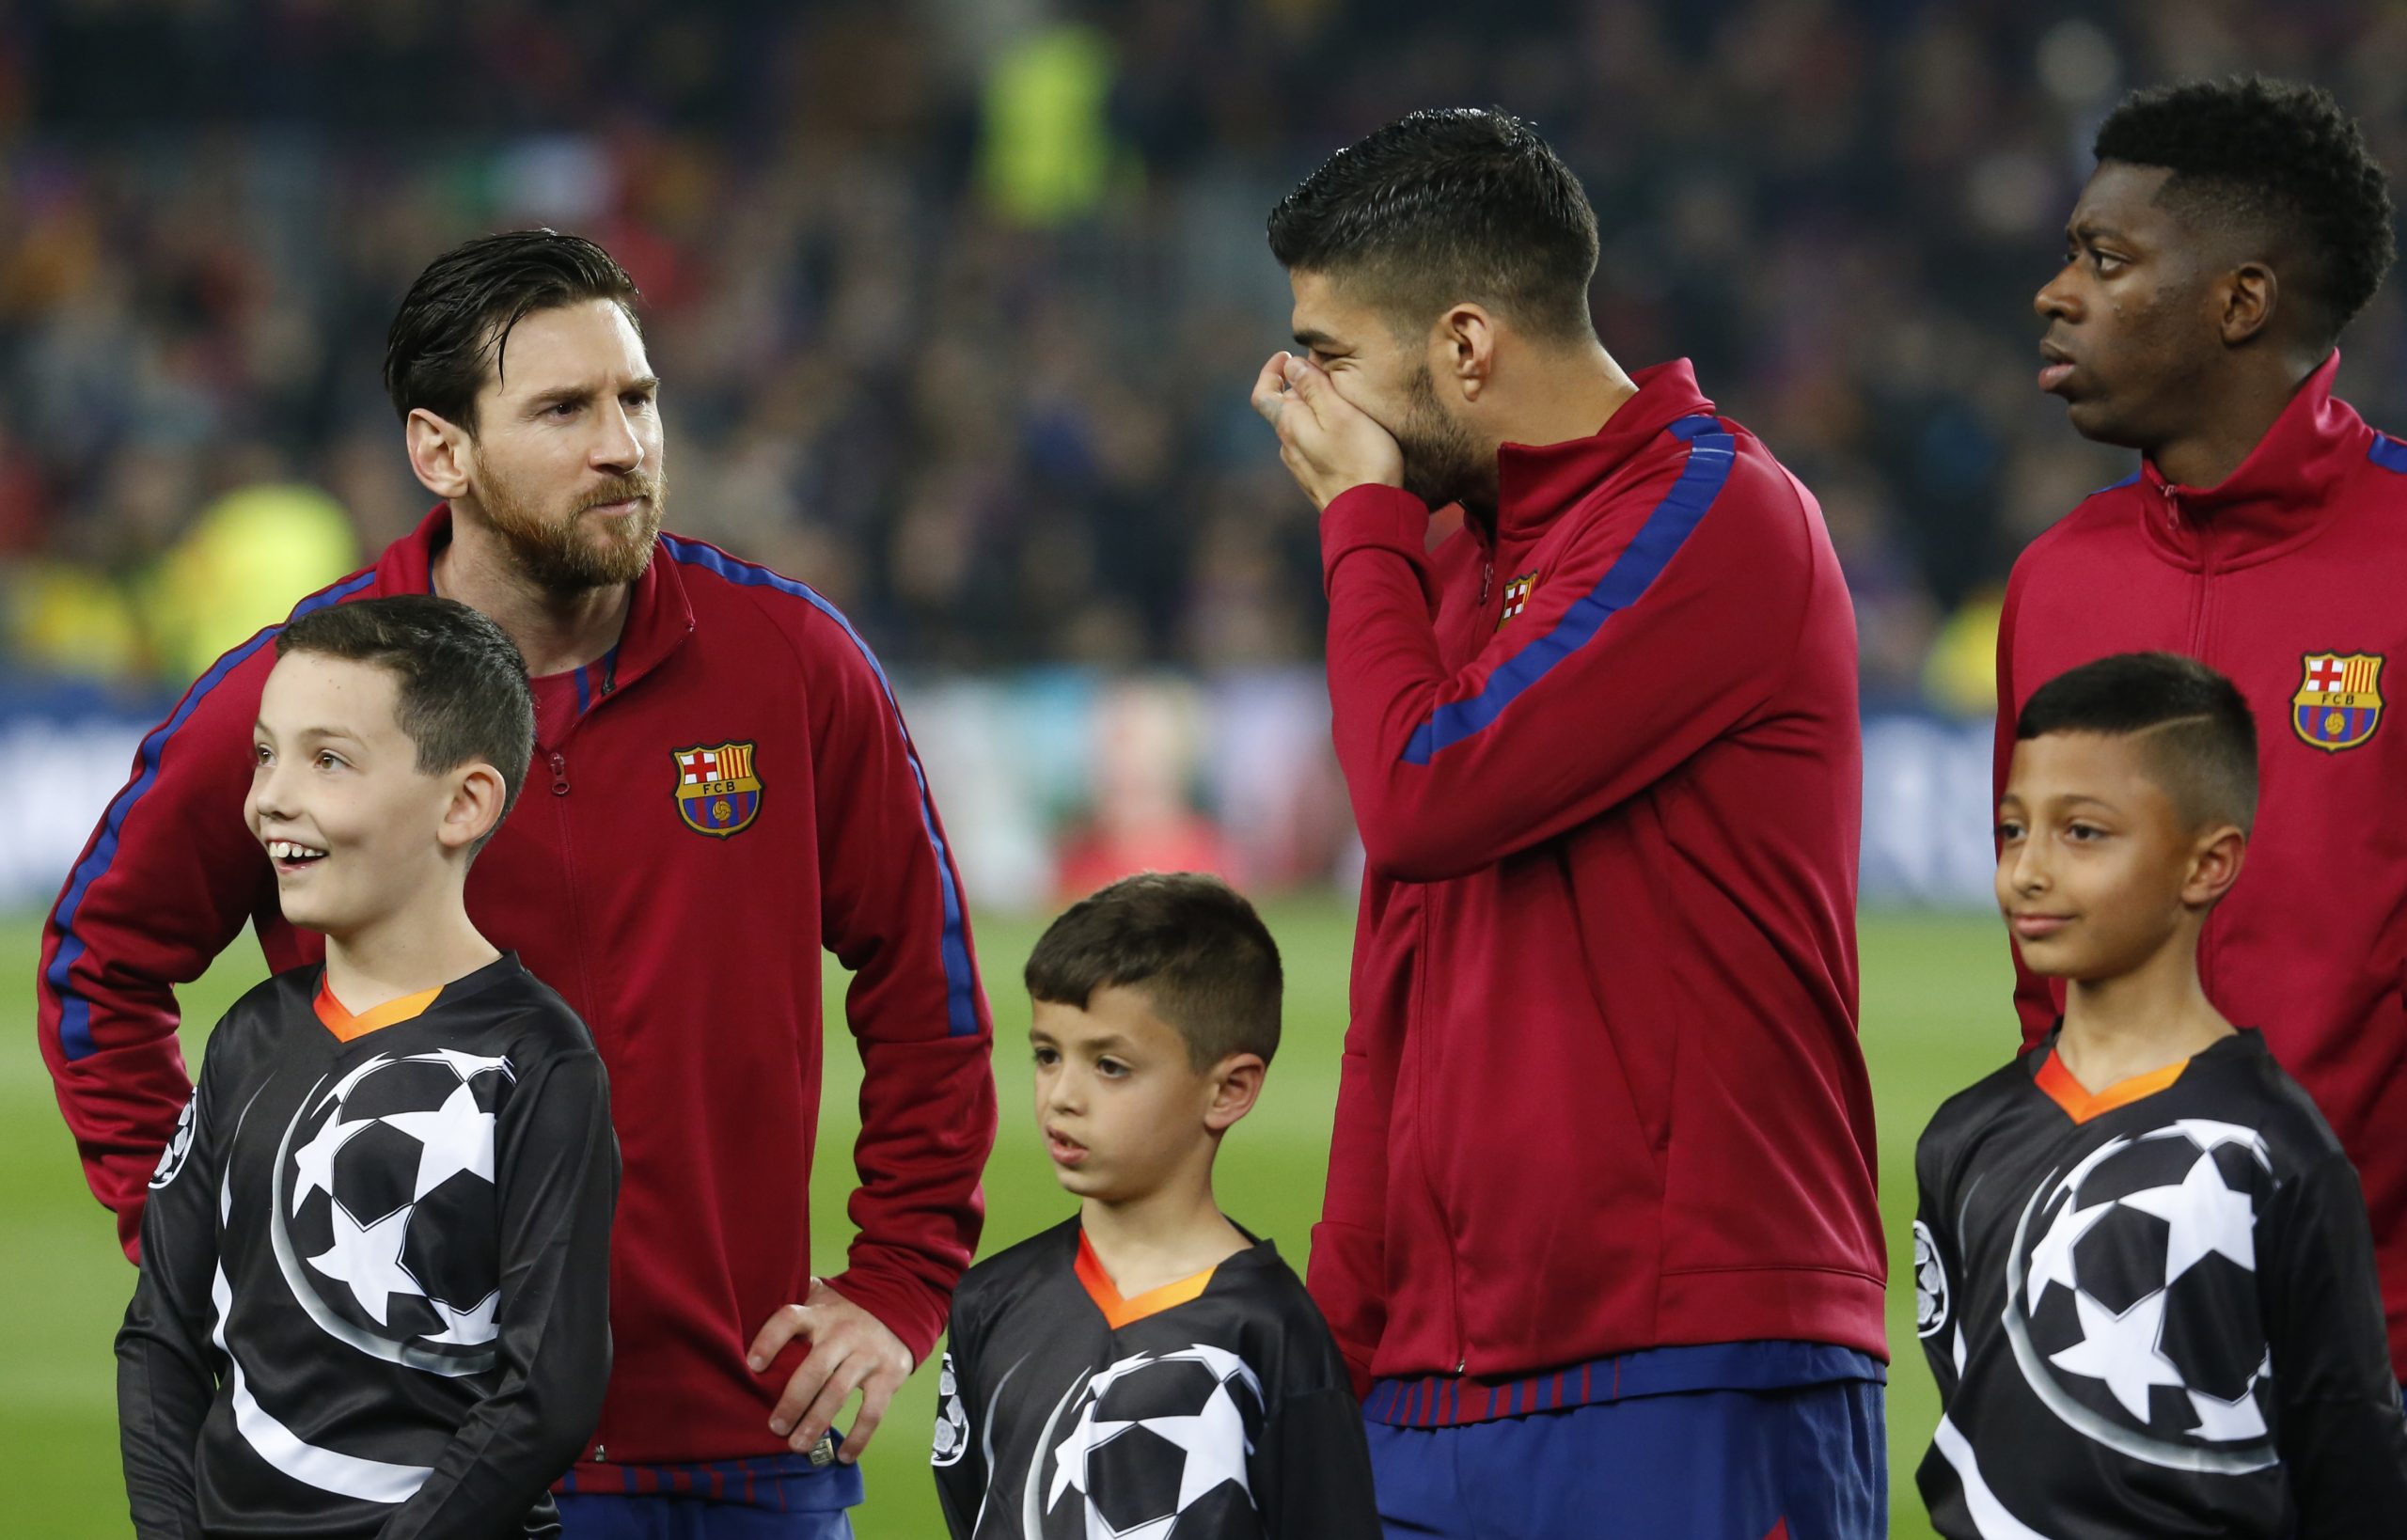 Barcelona's Argentinian forward Lionel Messi (L) looks at Barcelona's Uruguayan forward Luis Suarez (C) beside Barcelona's French forward Ousmane Dembele before the UEFA Champions League round of sixteen second leg  football match between FC Barcelona and Chelsea FC at the Camp Nou stadium in Barcelona on March 14, 2018. / AFP PHOTO / Pau Barrena        (Photo credit should read PAU BARRENA/AFP/Getty Images)